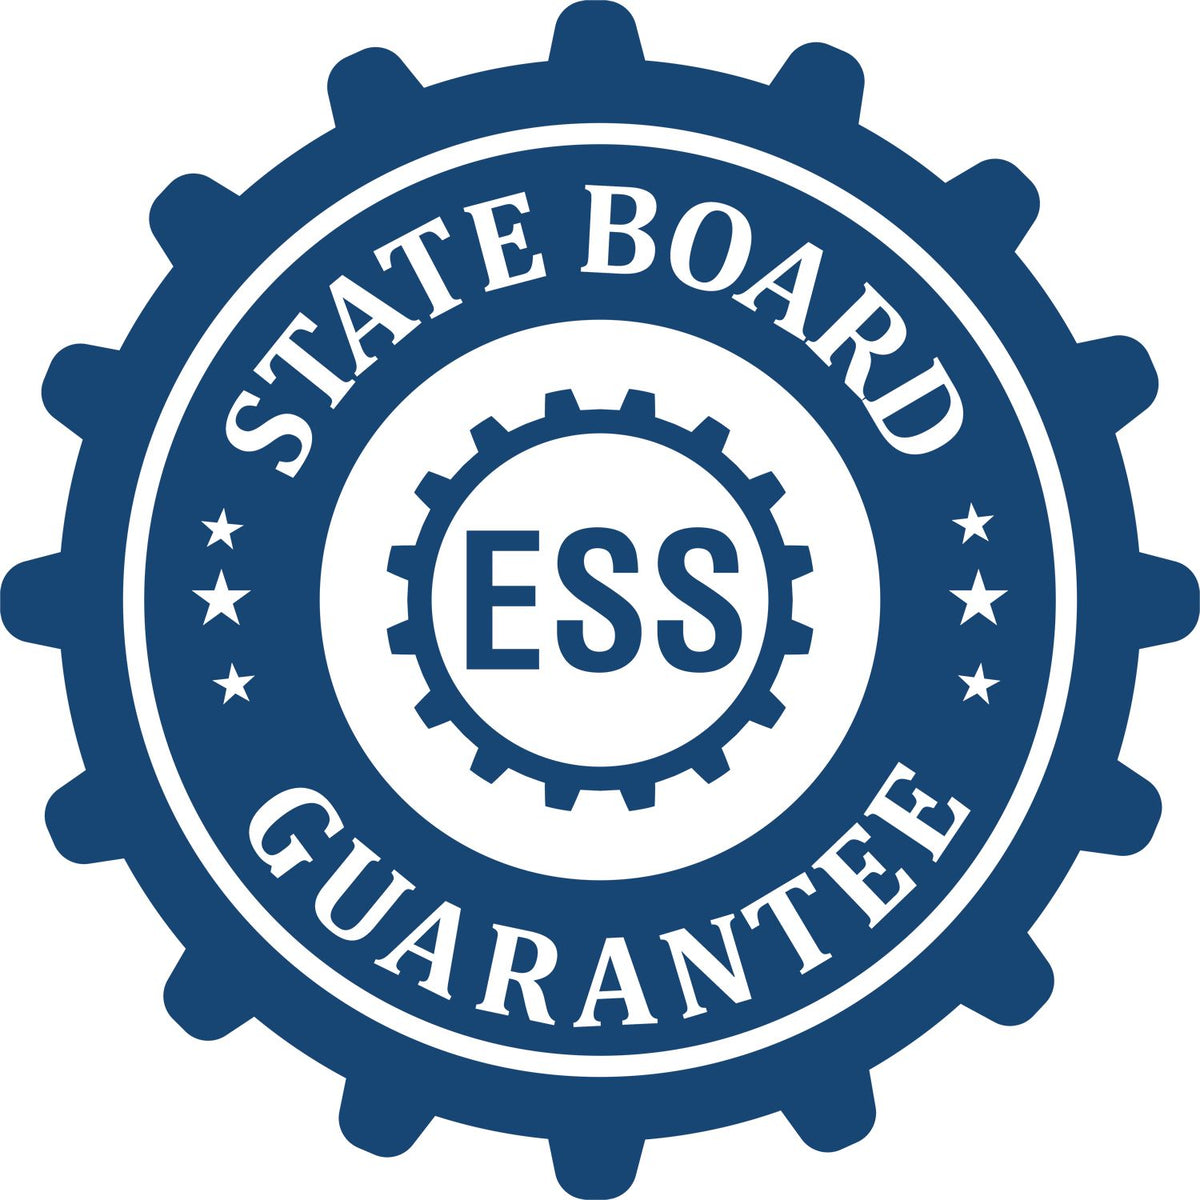 An emblem in a gear shape illustrating a state board guarantee for the Digital Wisconsin PE Stamp and Electronic Seal for Wisconsin Engineer product.